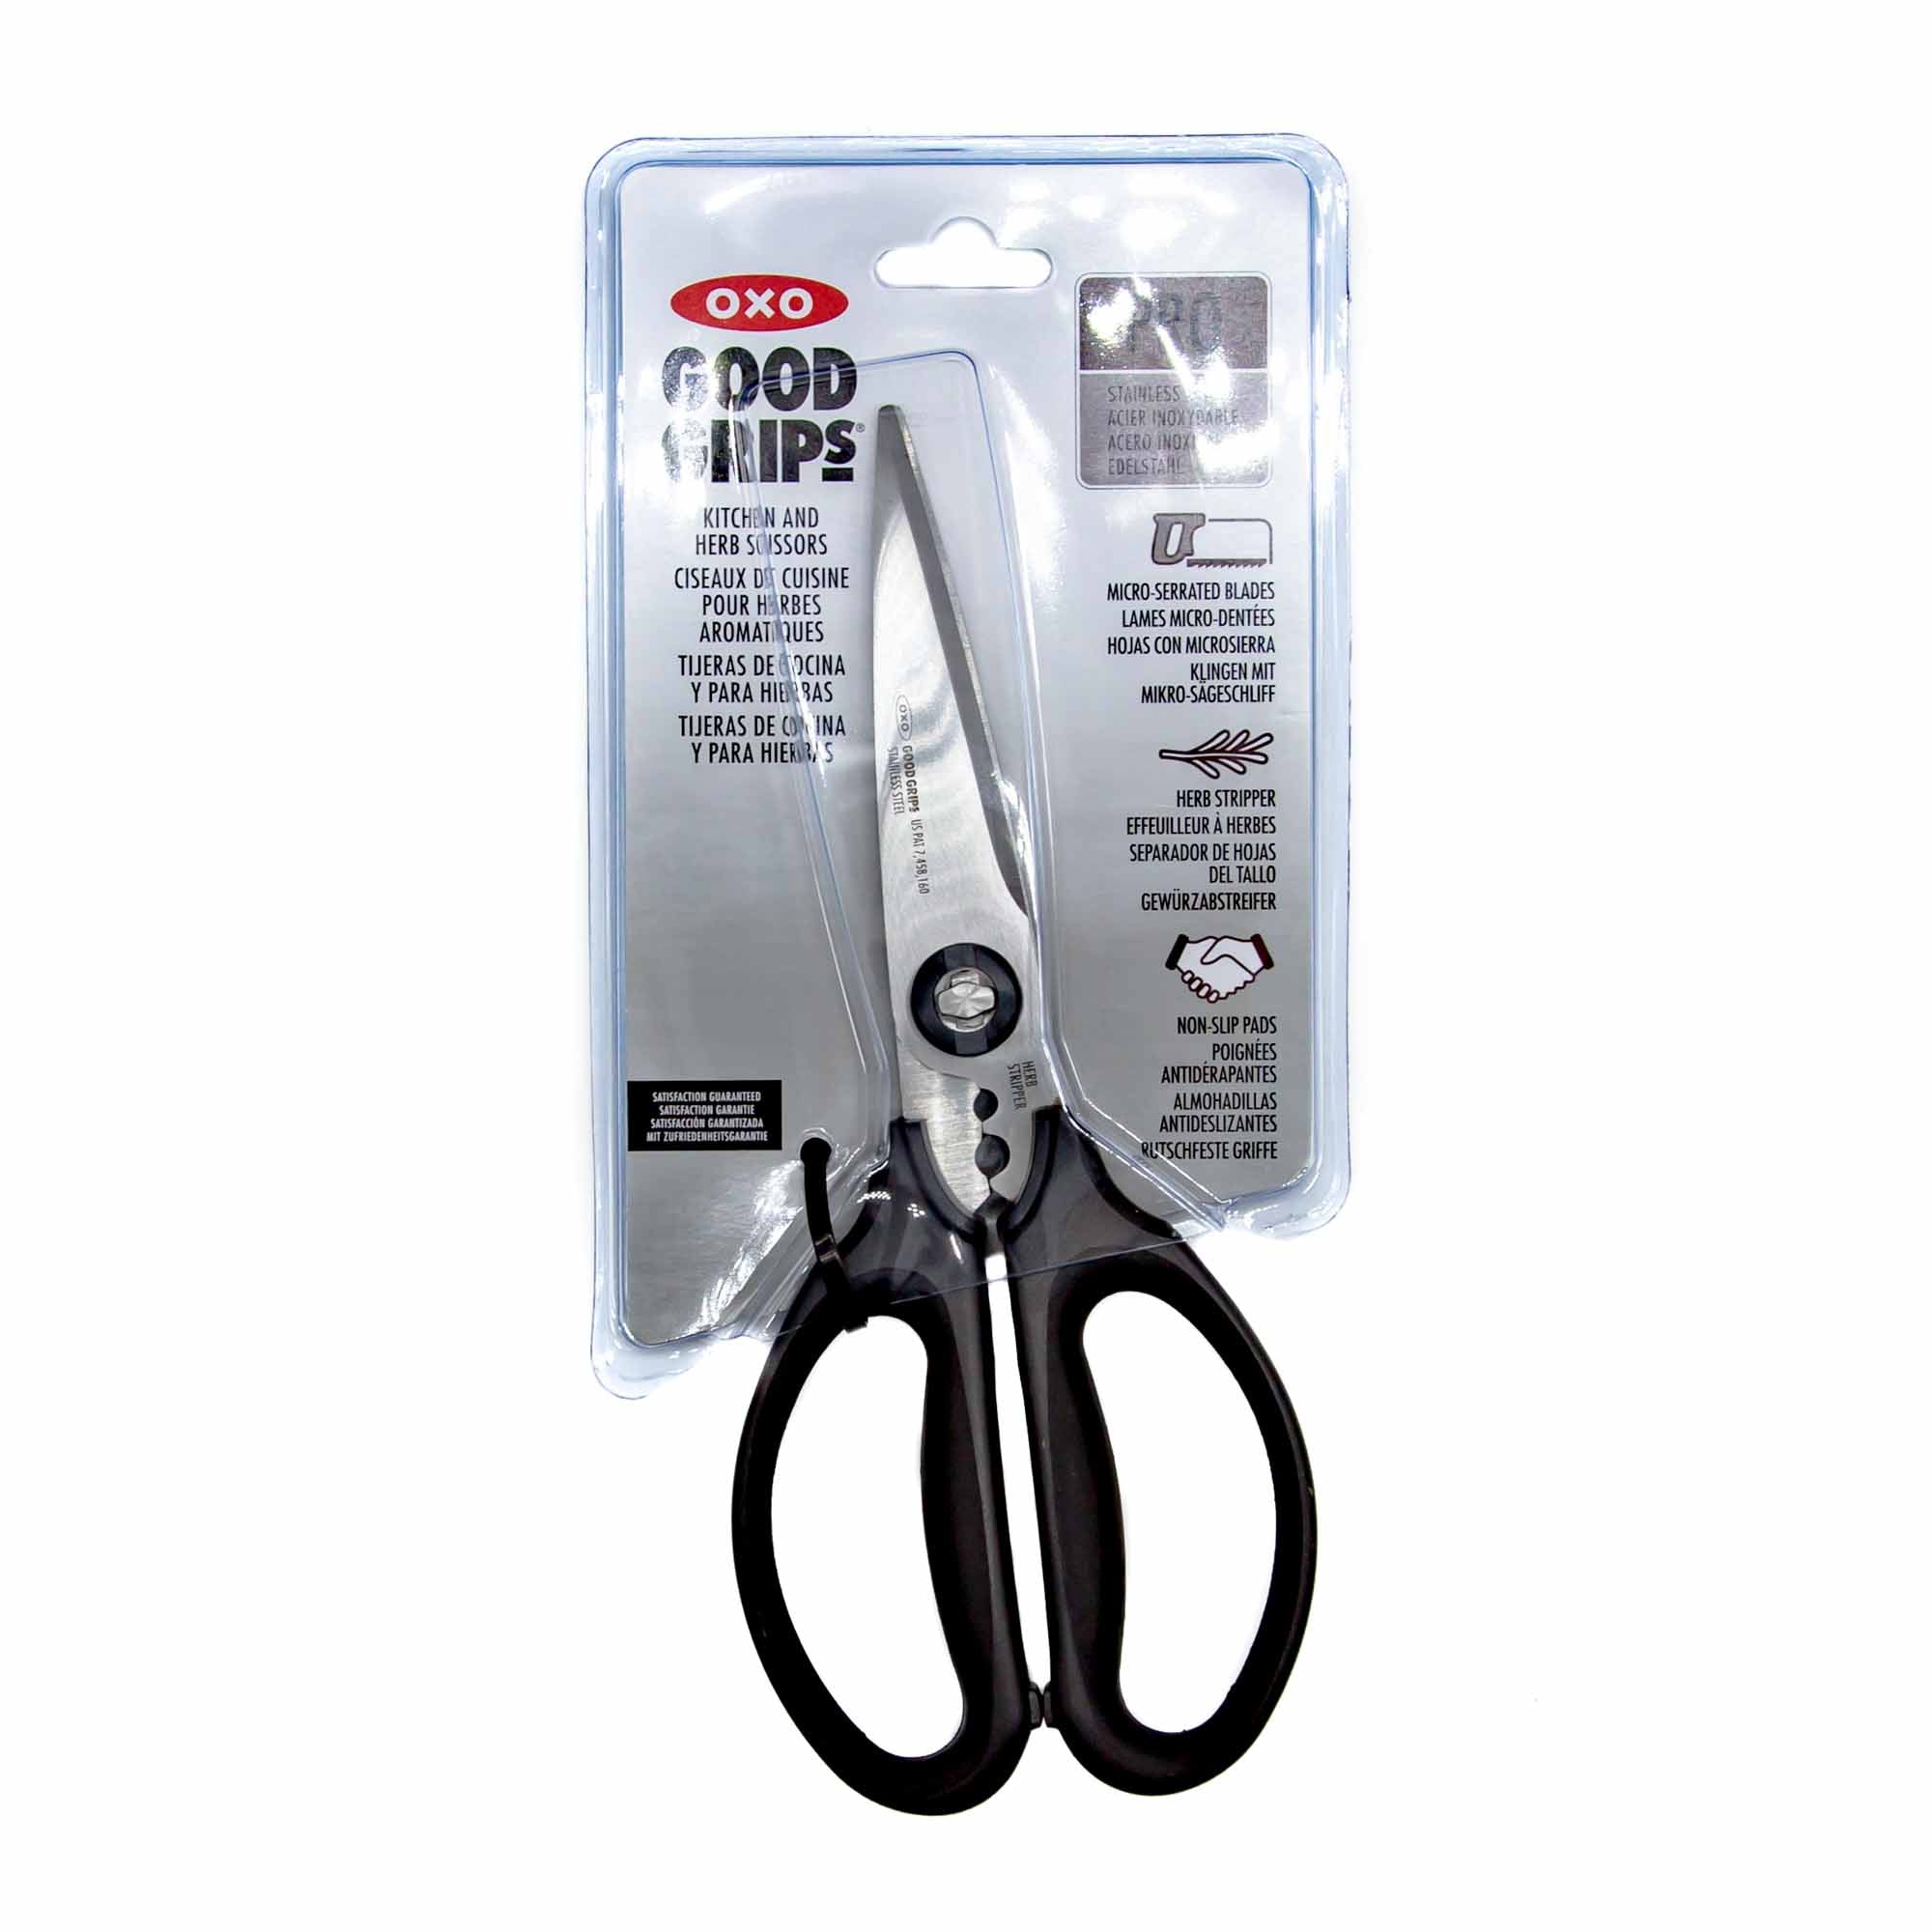 OXO Good Grips Flexible Kitchen Herb and Household Scissors 